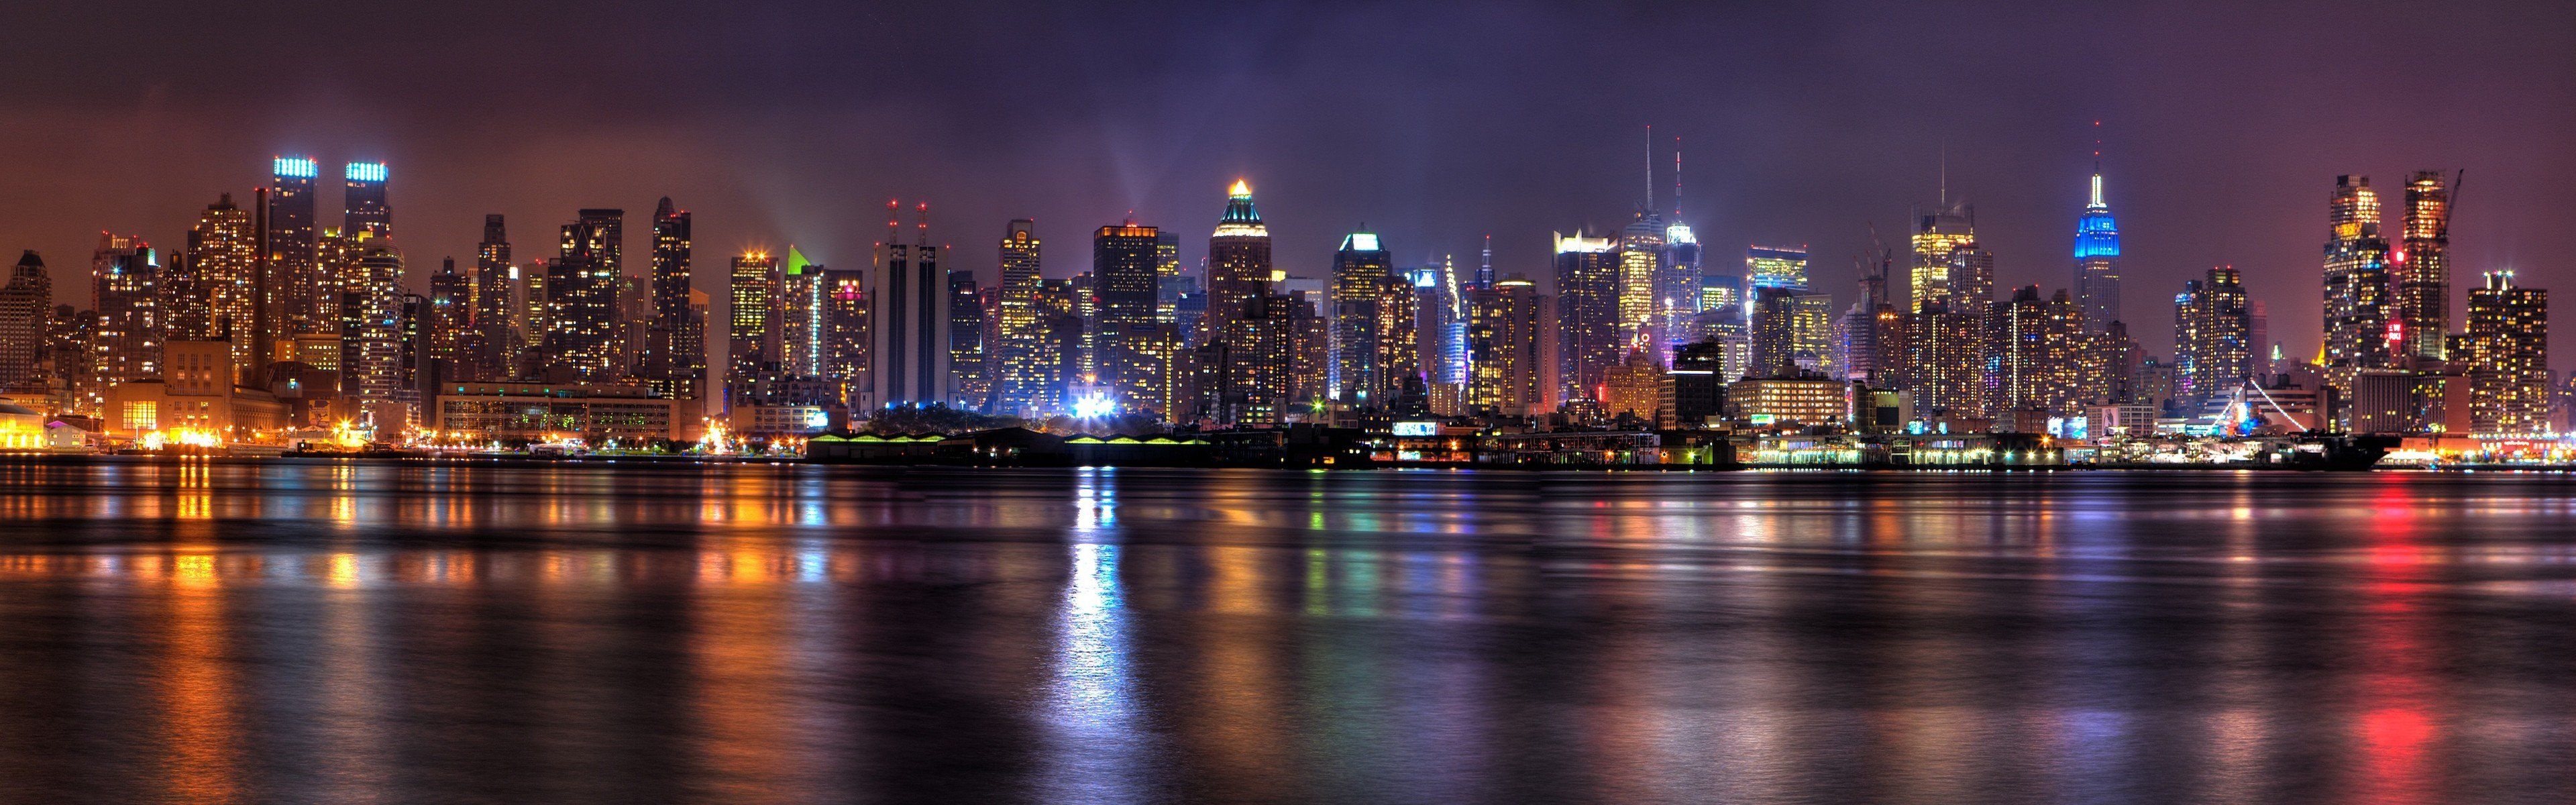 New York at Night, Dual monitor wallpapers, City backgrounds, 3840x1200 Dual Screen Desktop